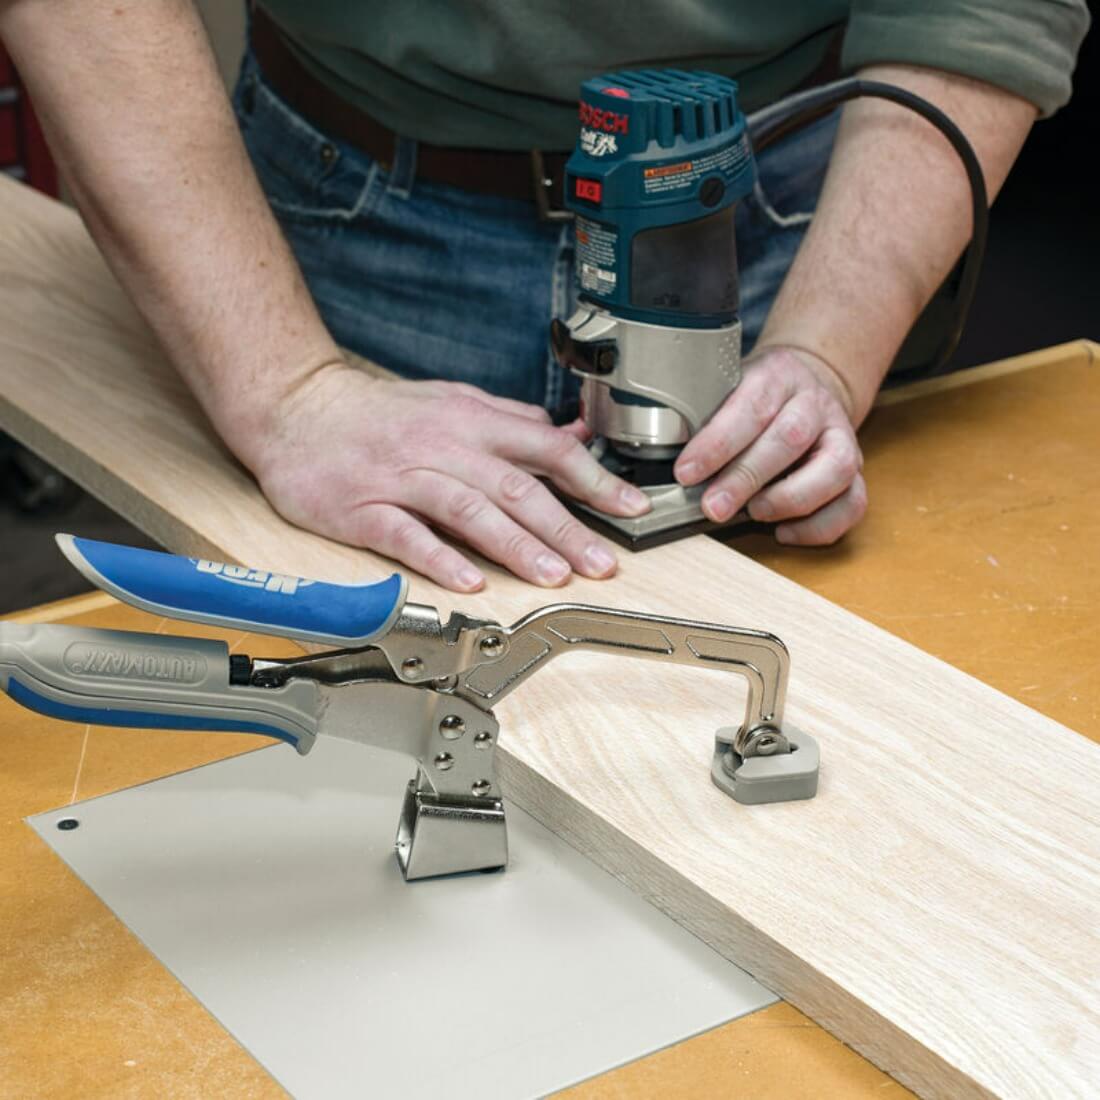 Kreg Automaxx 3 inch Bench Clamp is shown clamping a plank of wood being routered